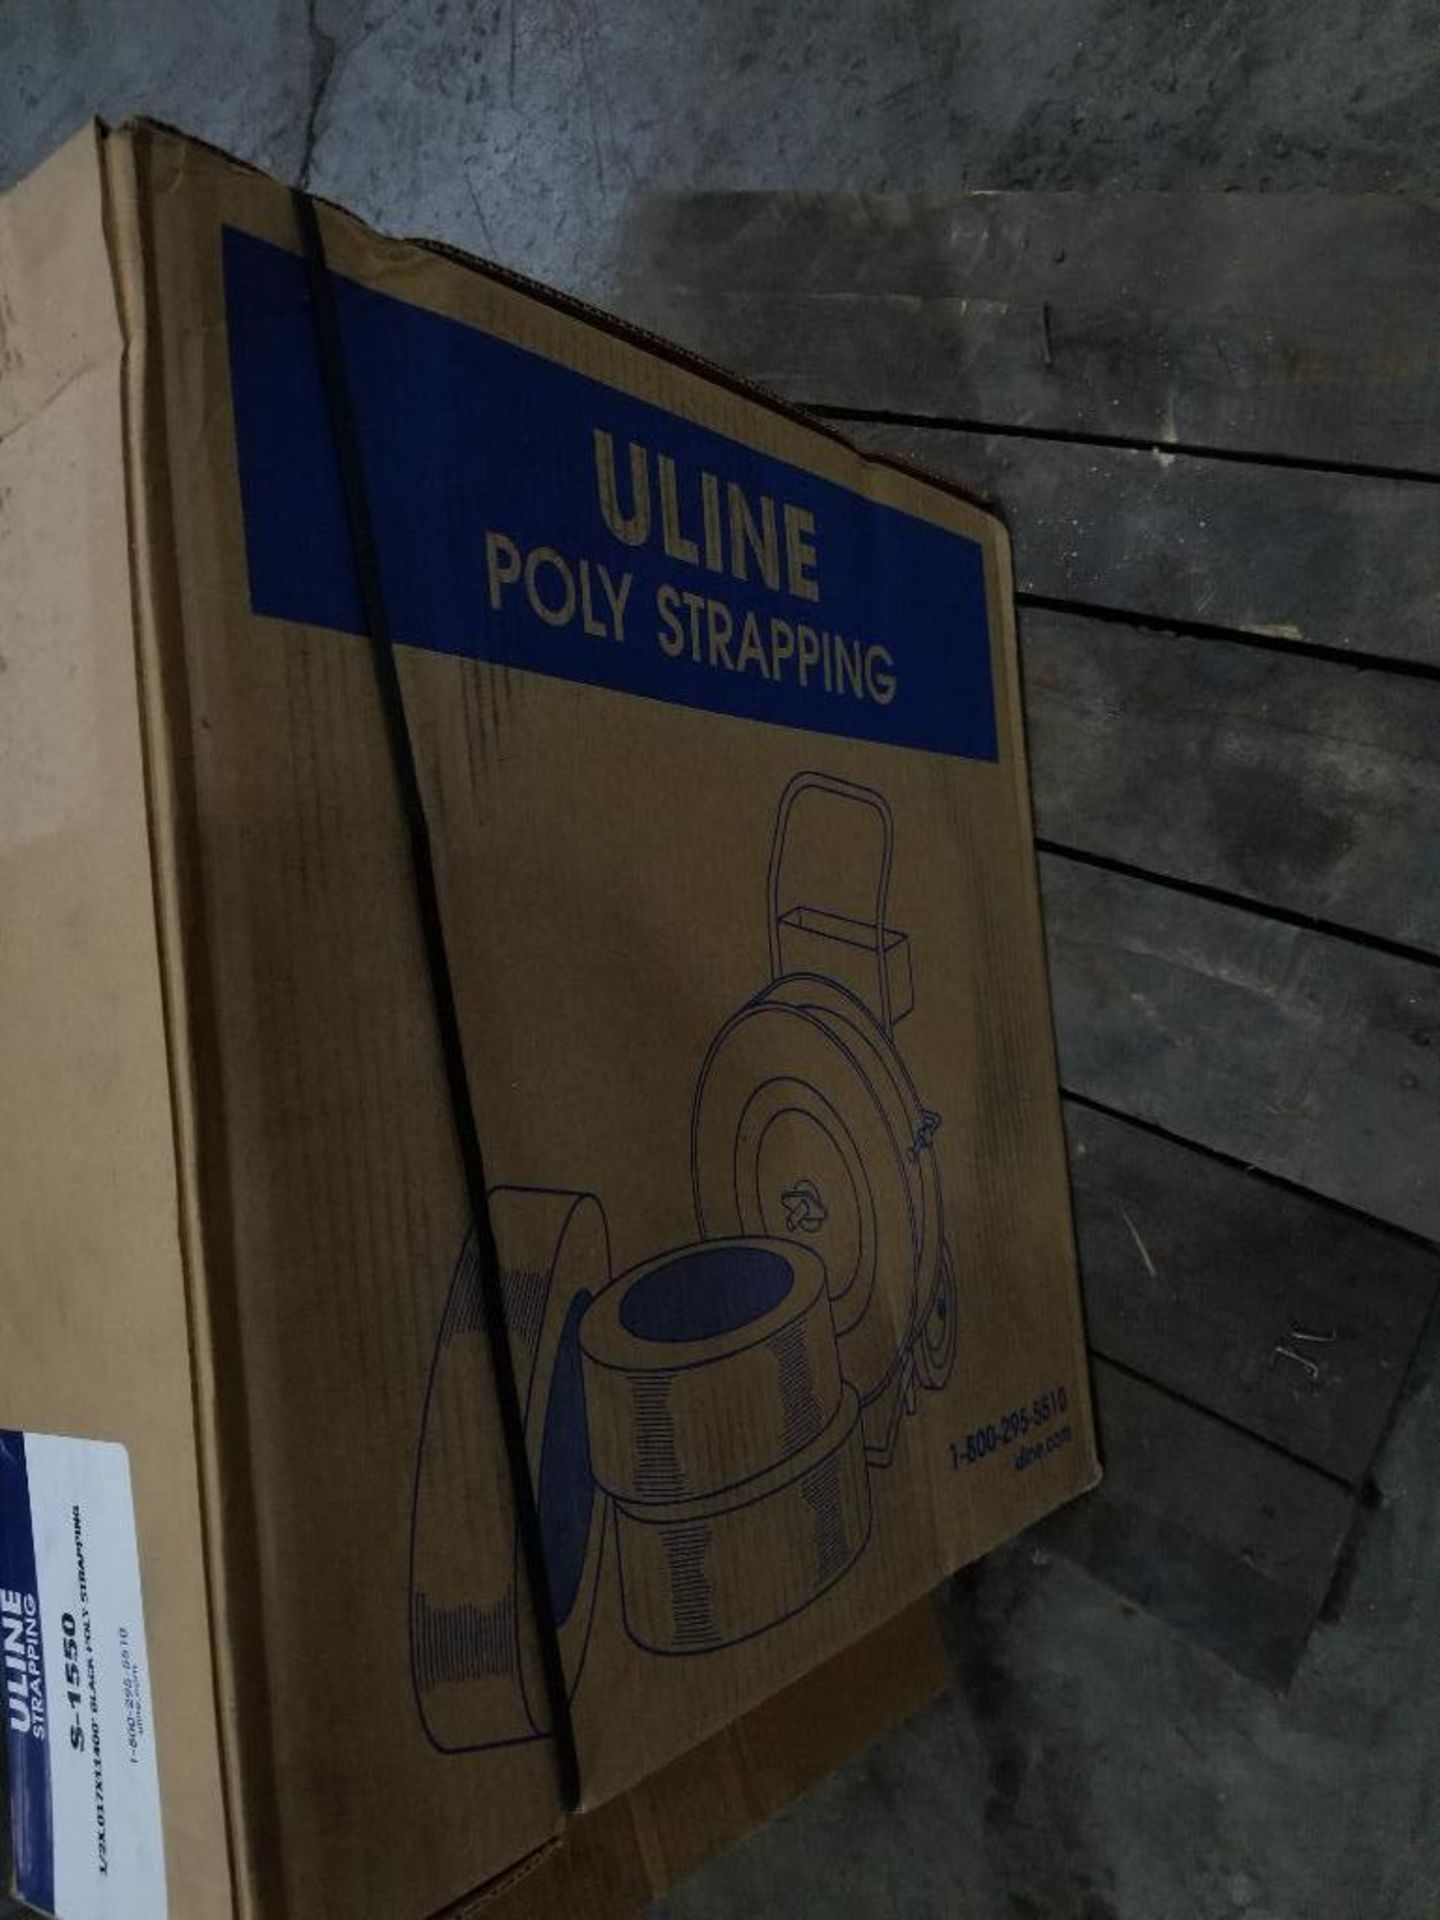 Qty 7 - Uline poly strapping boxes. Model S-1550. - Image 2 of 3